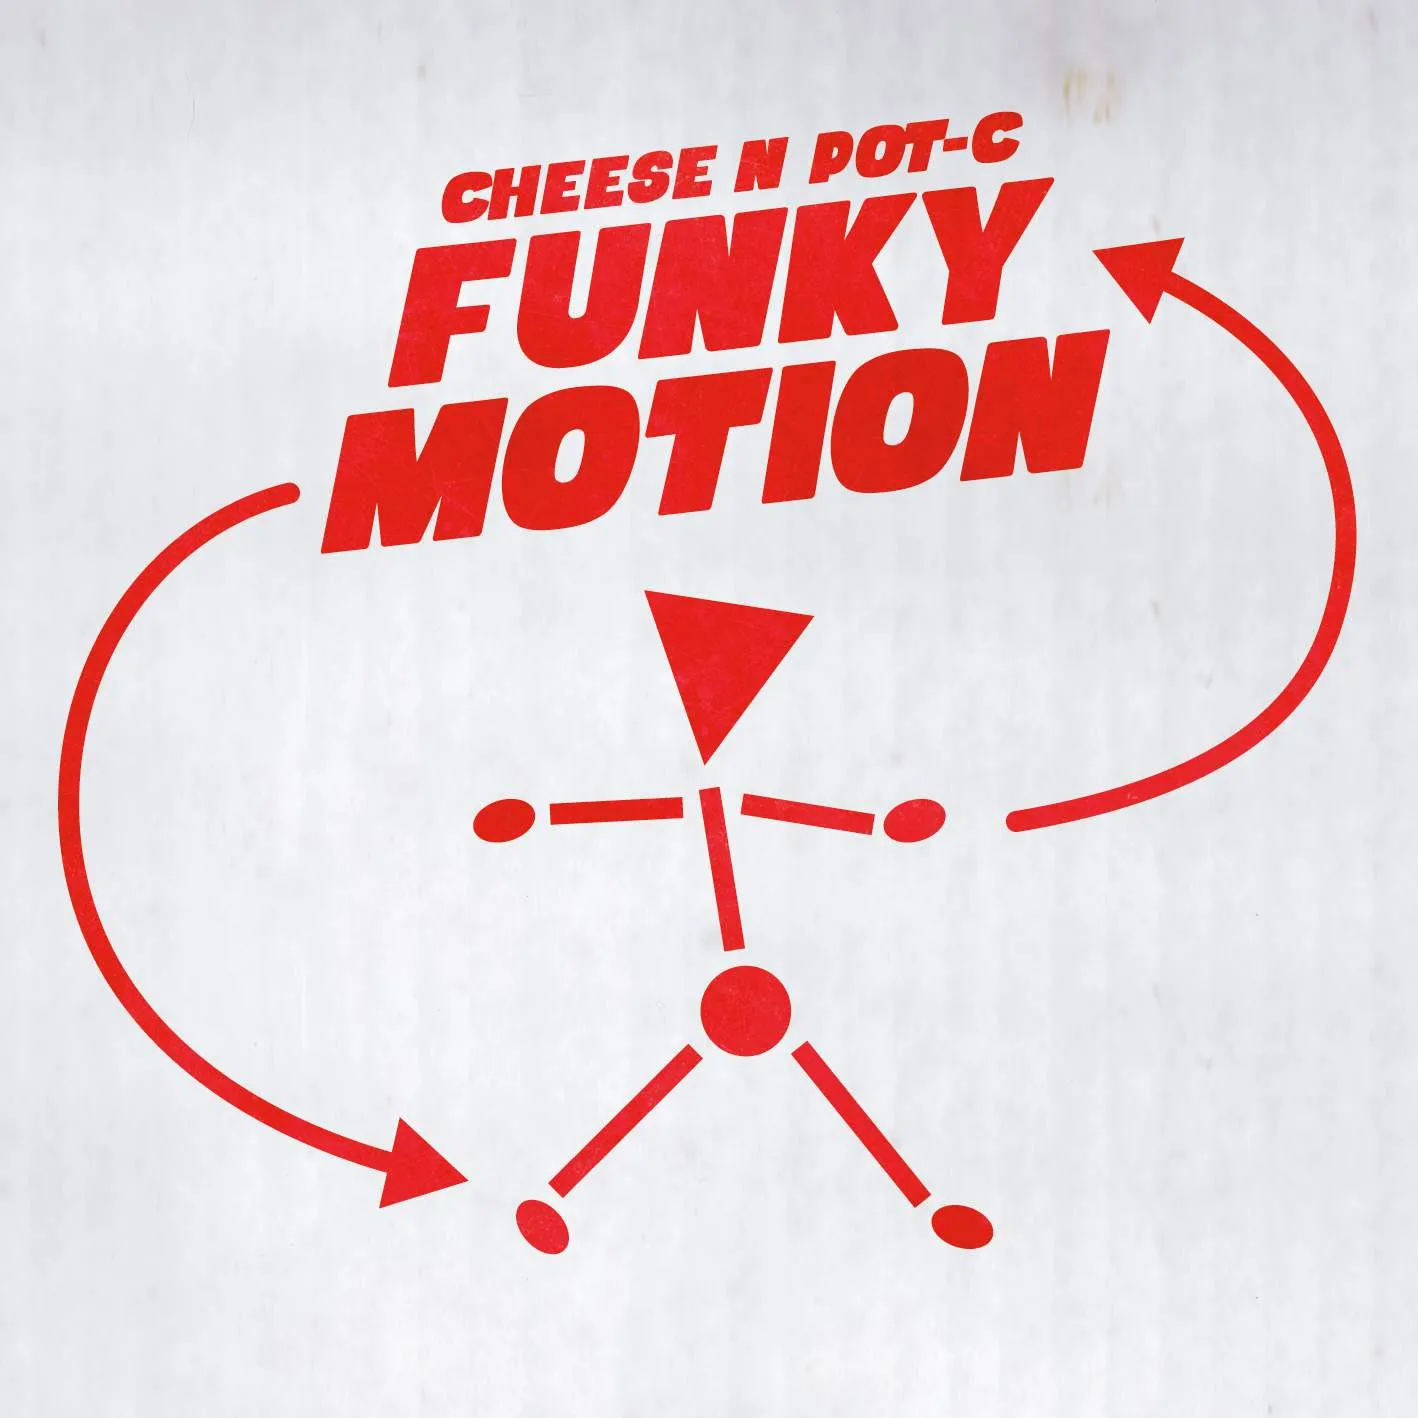 Album cover for “Funky Motion” by Cheese N Pot-C